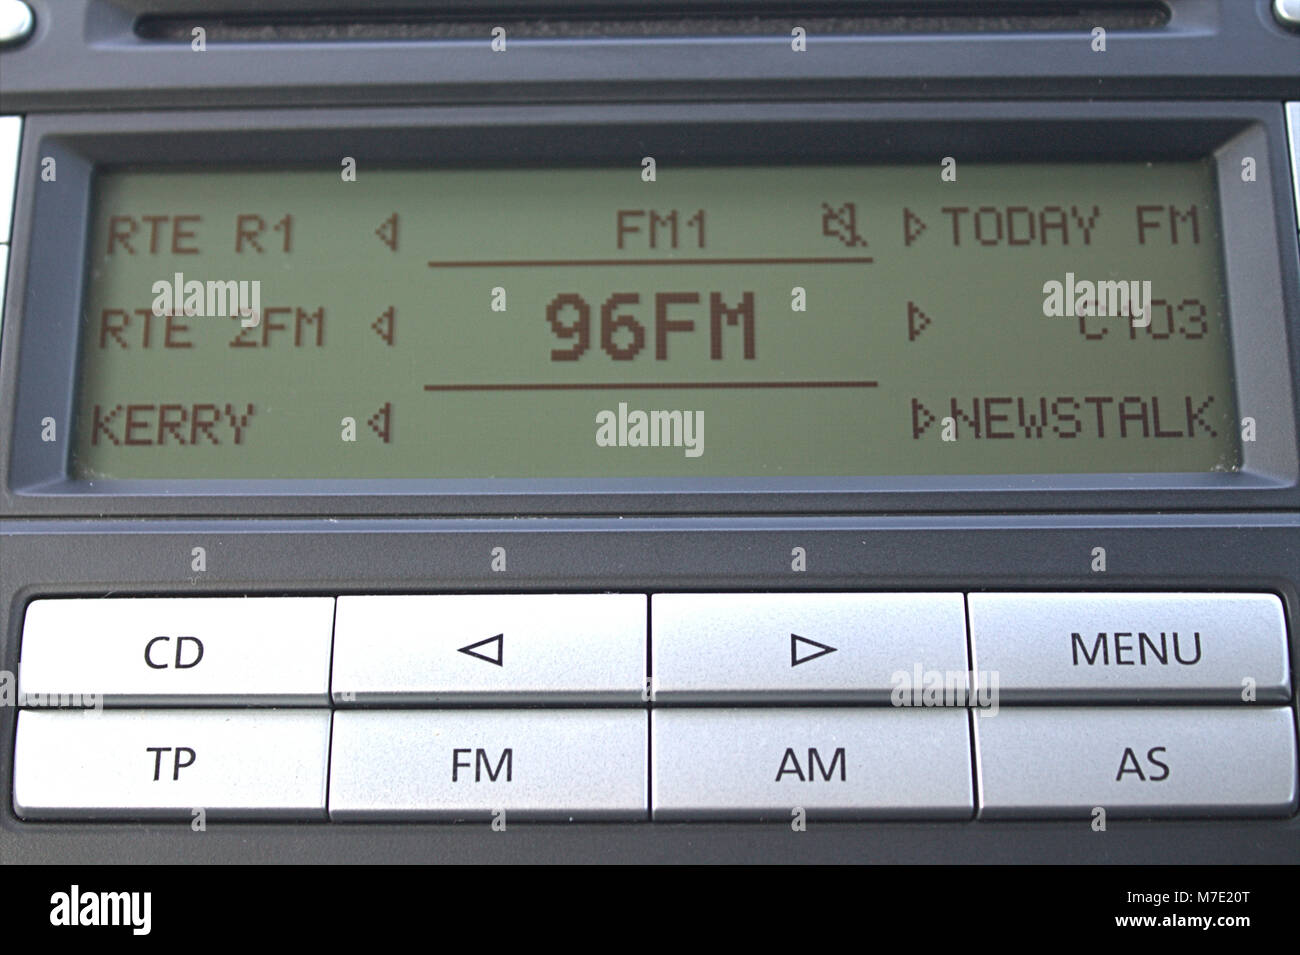 Close up of in car entertainment system showing Fm and AM selections Stock Photo